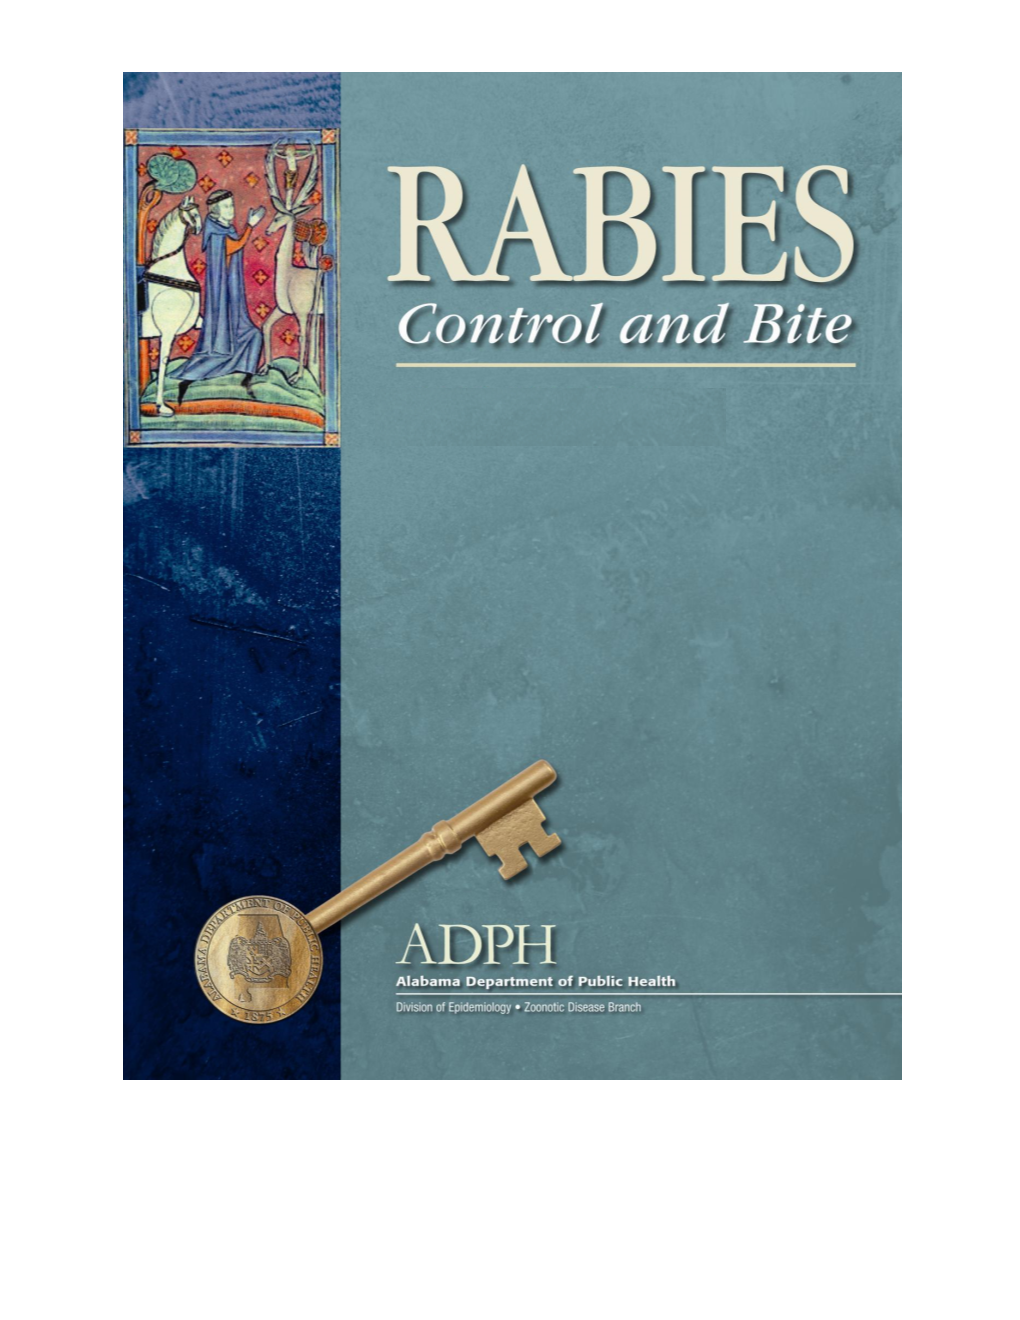 Rabies Control and Bite Manual, July 2015 2